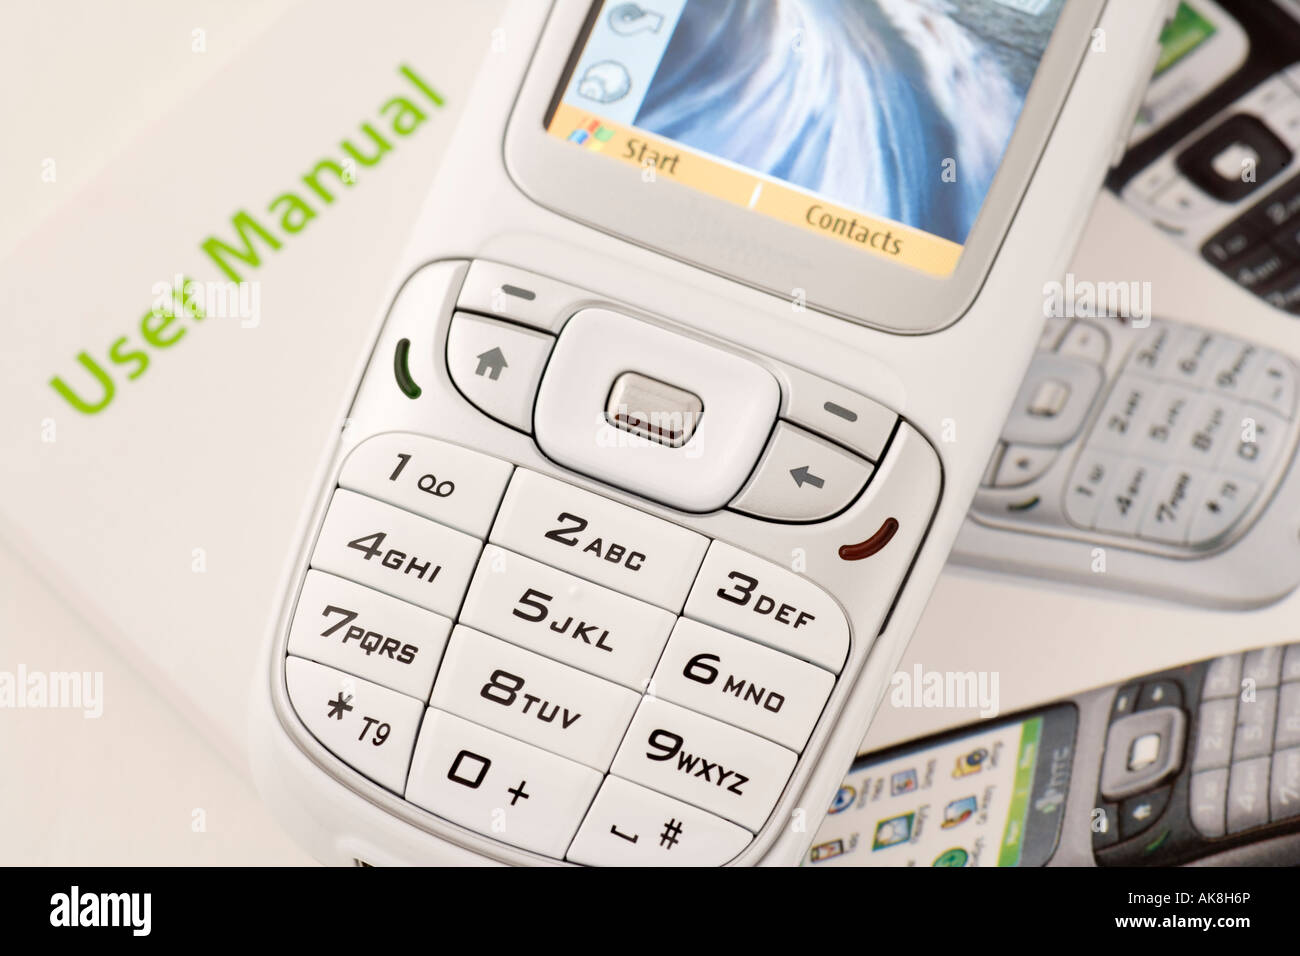 User manual and close up of numbers and symbols on keys on the keypad of a white mobile phone Stock Photo